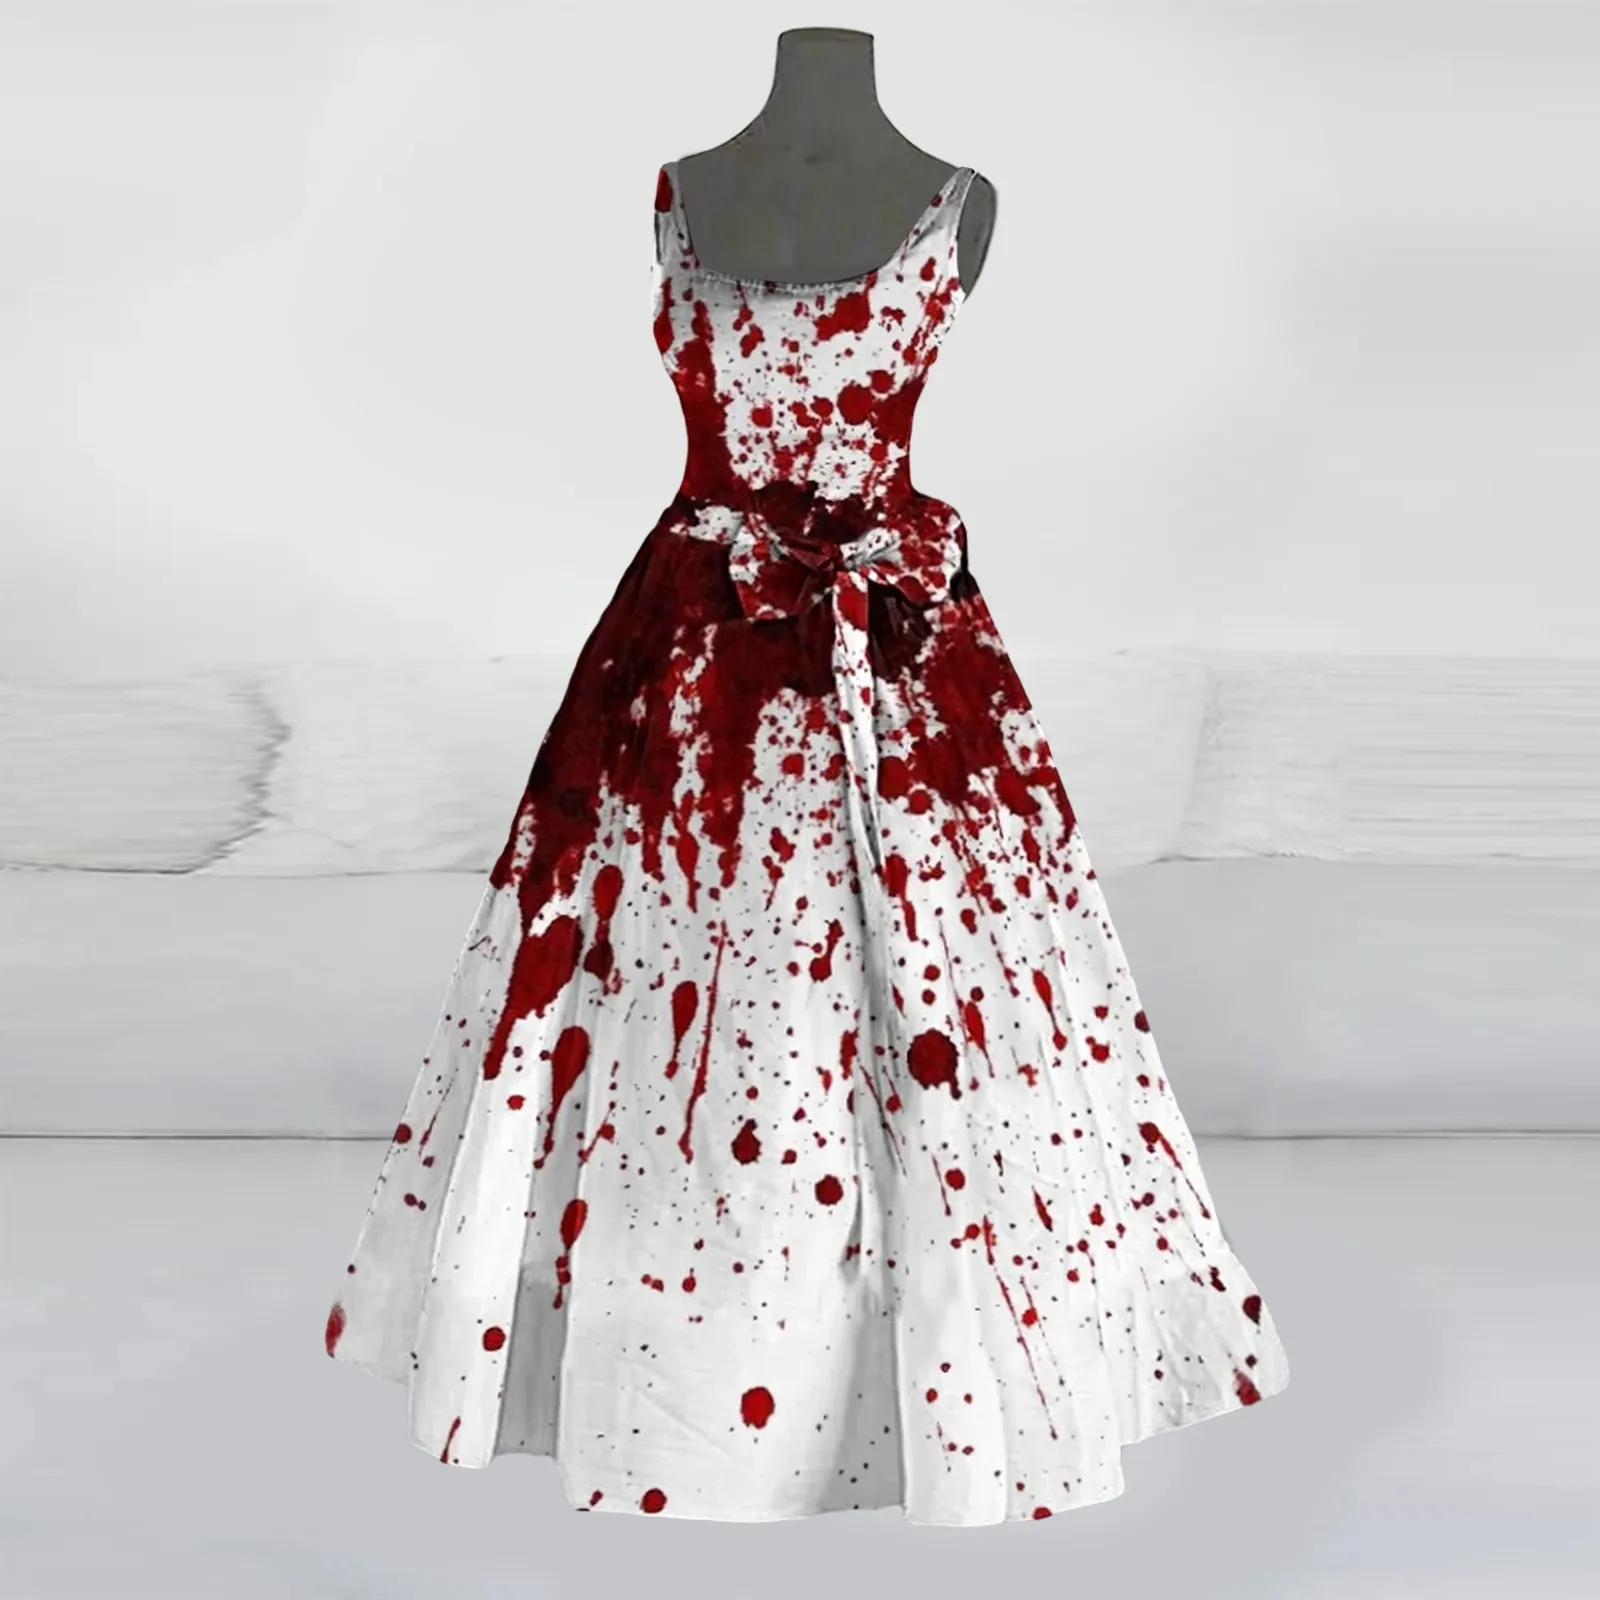 

Chic Halloween Costumes For Women Bloody Ghost Print Flared Dress Sleeveless Tunic Sexy Cocktail Dress Wedding Guest Dresses